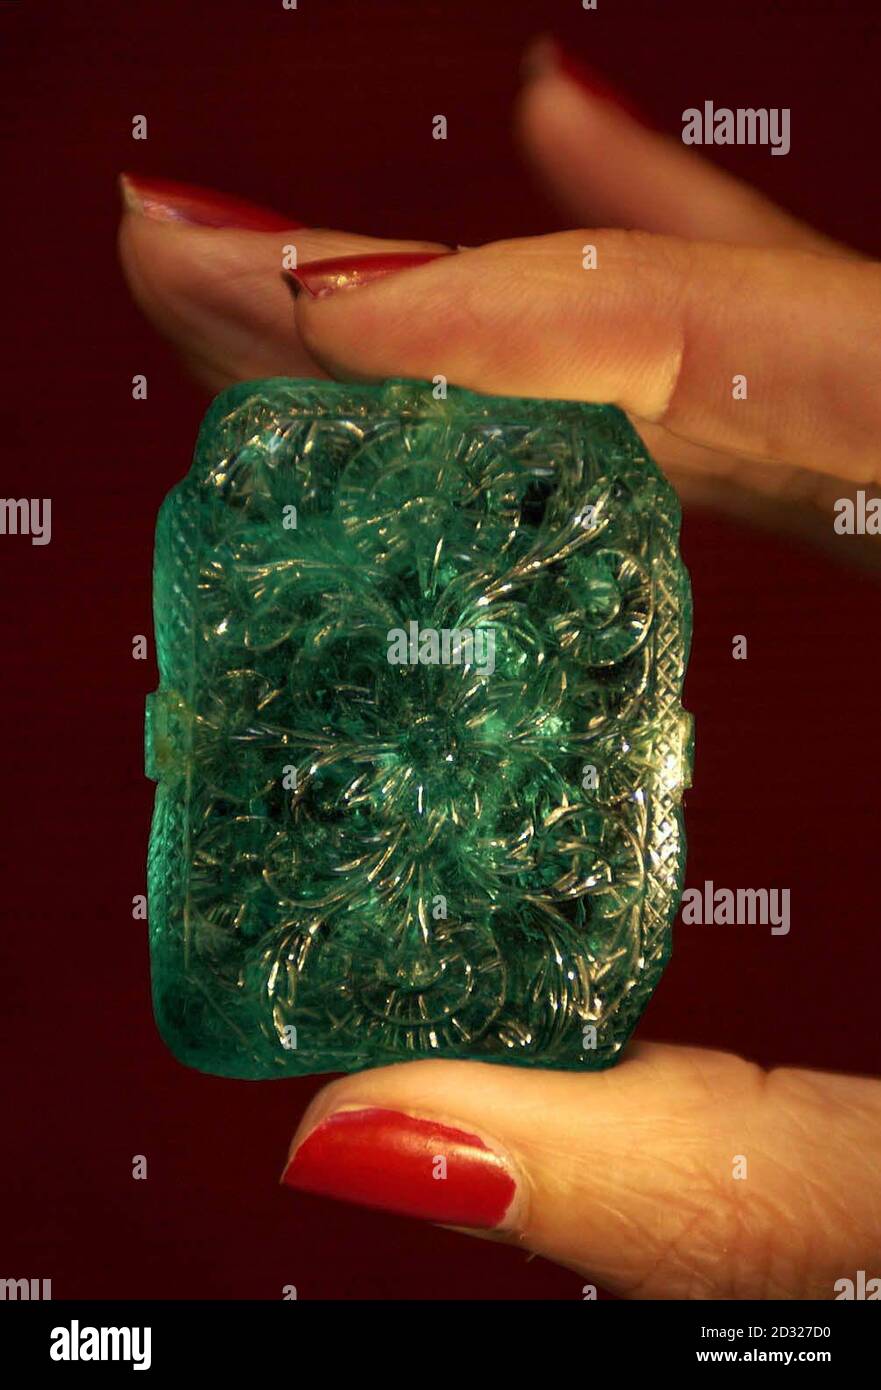 A carved, rectangular cut Colombian Mughal emerald weighing 217.80 carats, known as 'the Mughal', which is expected to reach  1,000,000 in Christie's forthcoming Arts of India auction on 27 September 2001.   *The rare 400-year-old emerald was expected to fetch over  1 million when it went under the hammer at Christie's at an auction of Indian artefacts, Thursday 27 September, 2001. The Mughal Emerald, which weighs over 217 carats, dates from 1695 and is the only known carved, inscribed and dated emerald of the period. Stock Photo